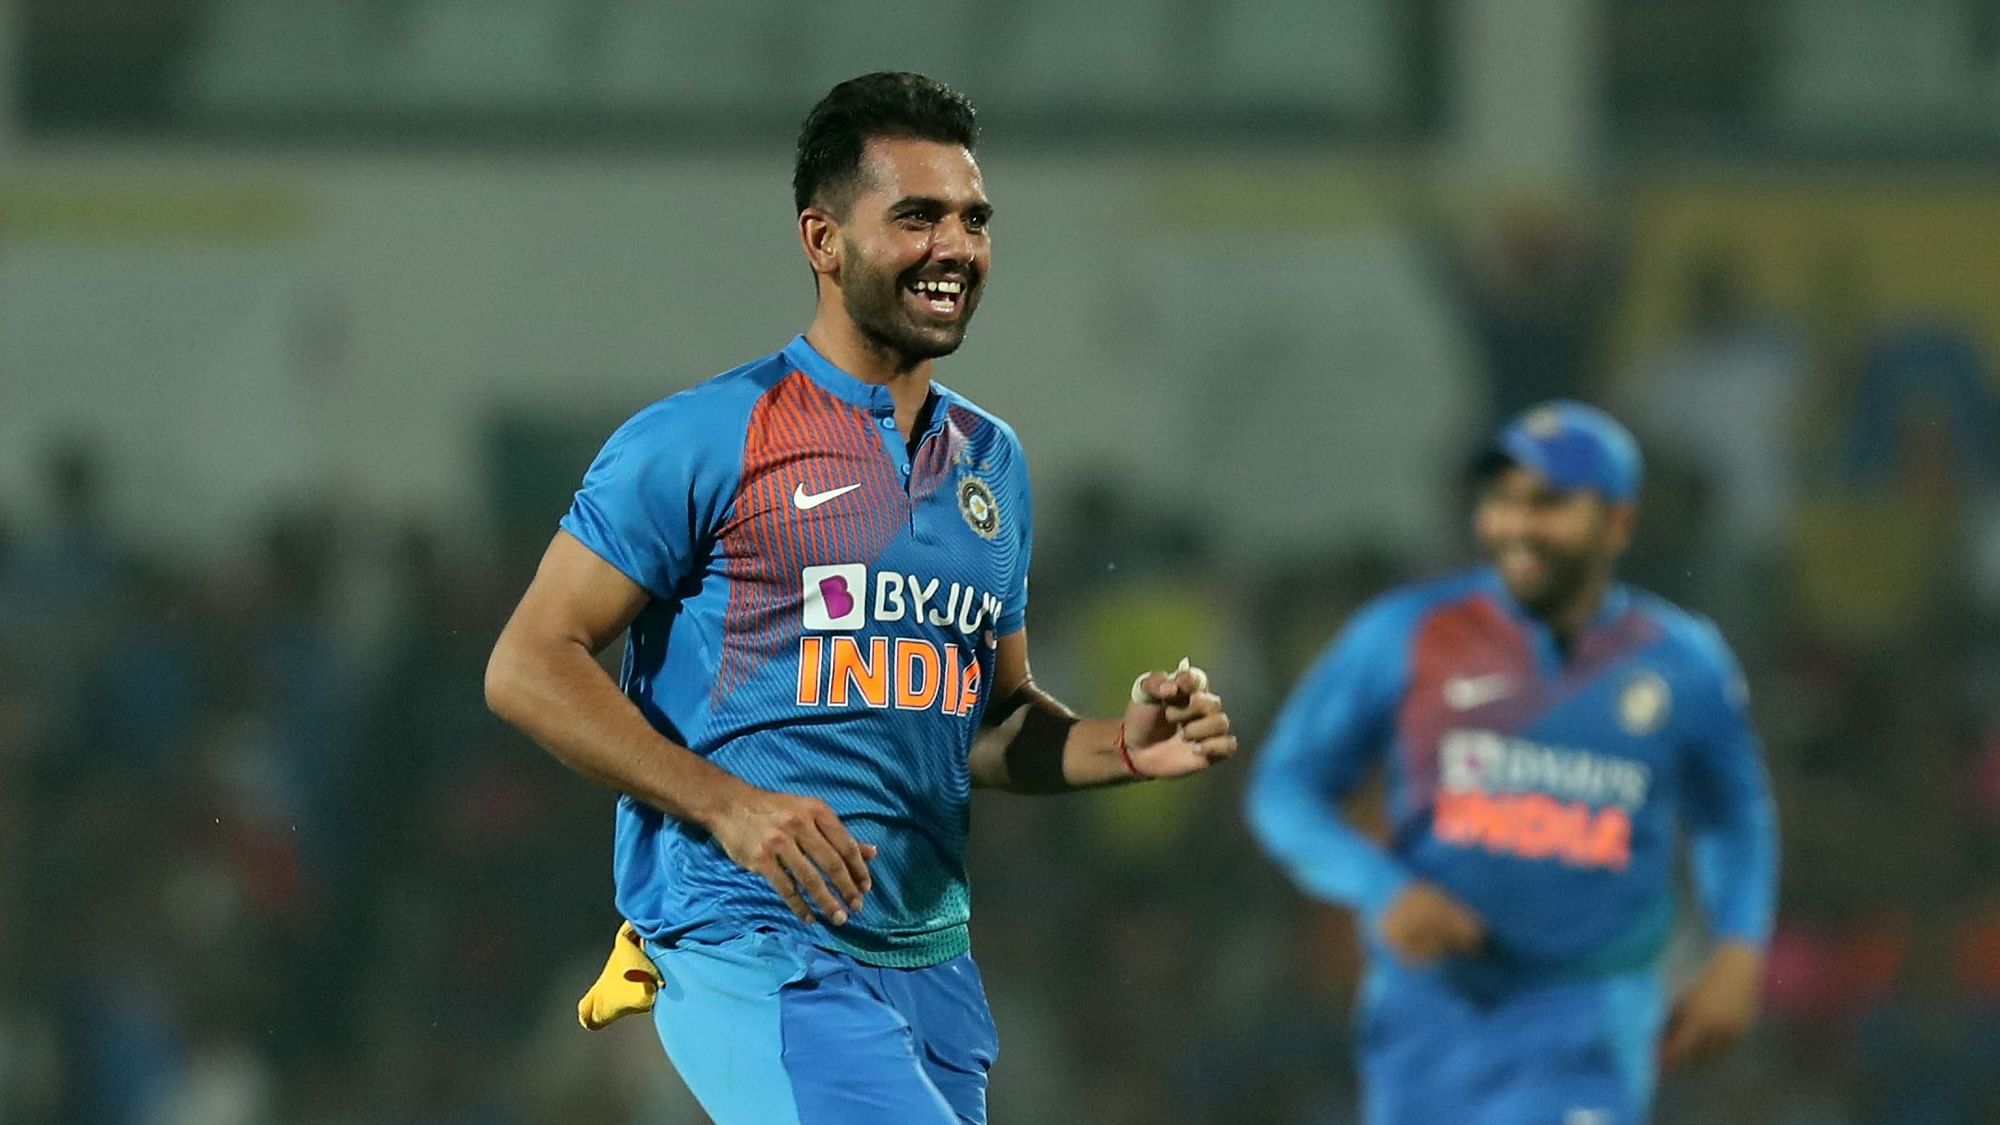 Medium-pacer Deepak Chahar followed up his hat-trick in the final India-Bangladesh T20 international with almost a repeat